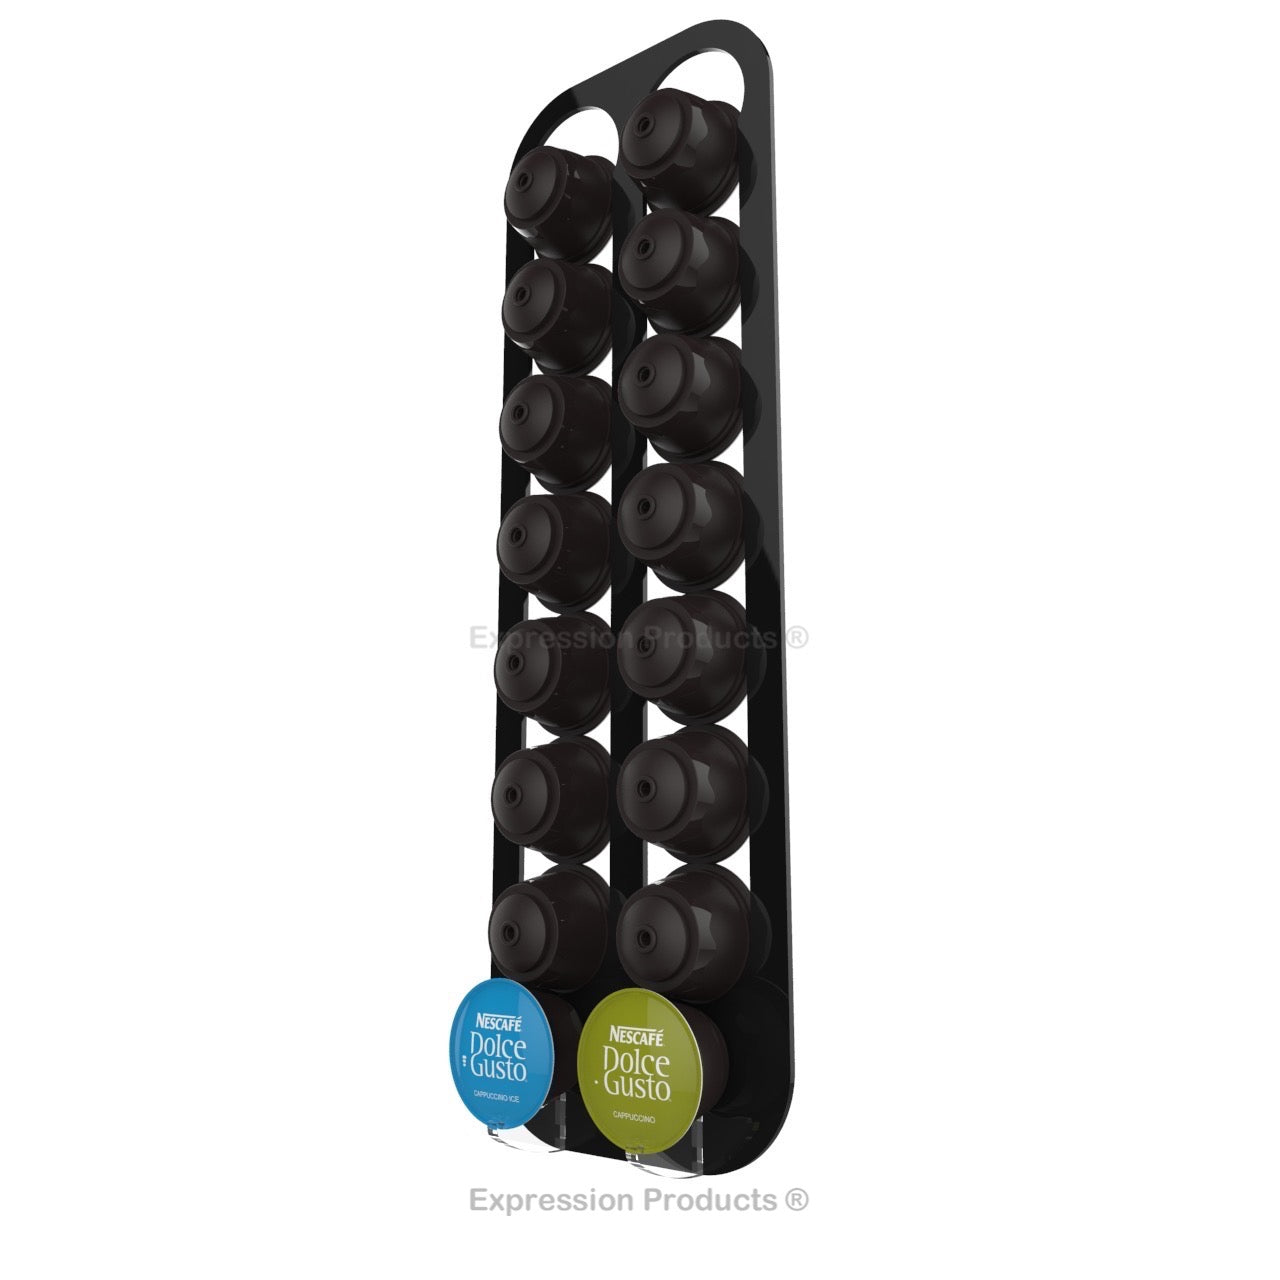 Dolce Gusto Coffee Pod Holder, Wall Mounted.  Shown in Black Holding 16 Pods